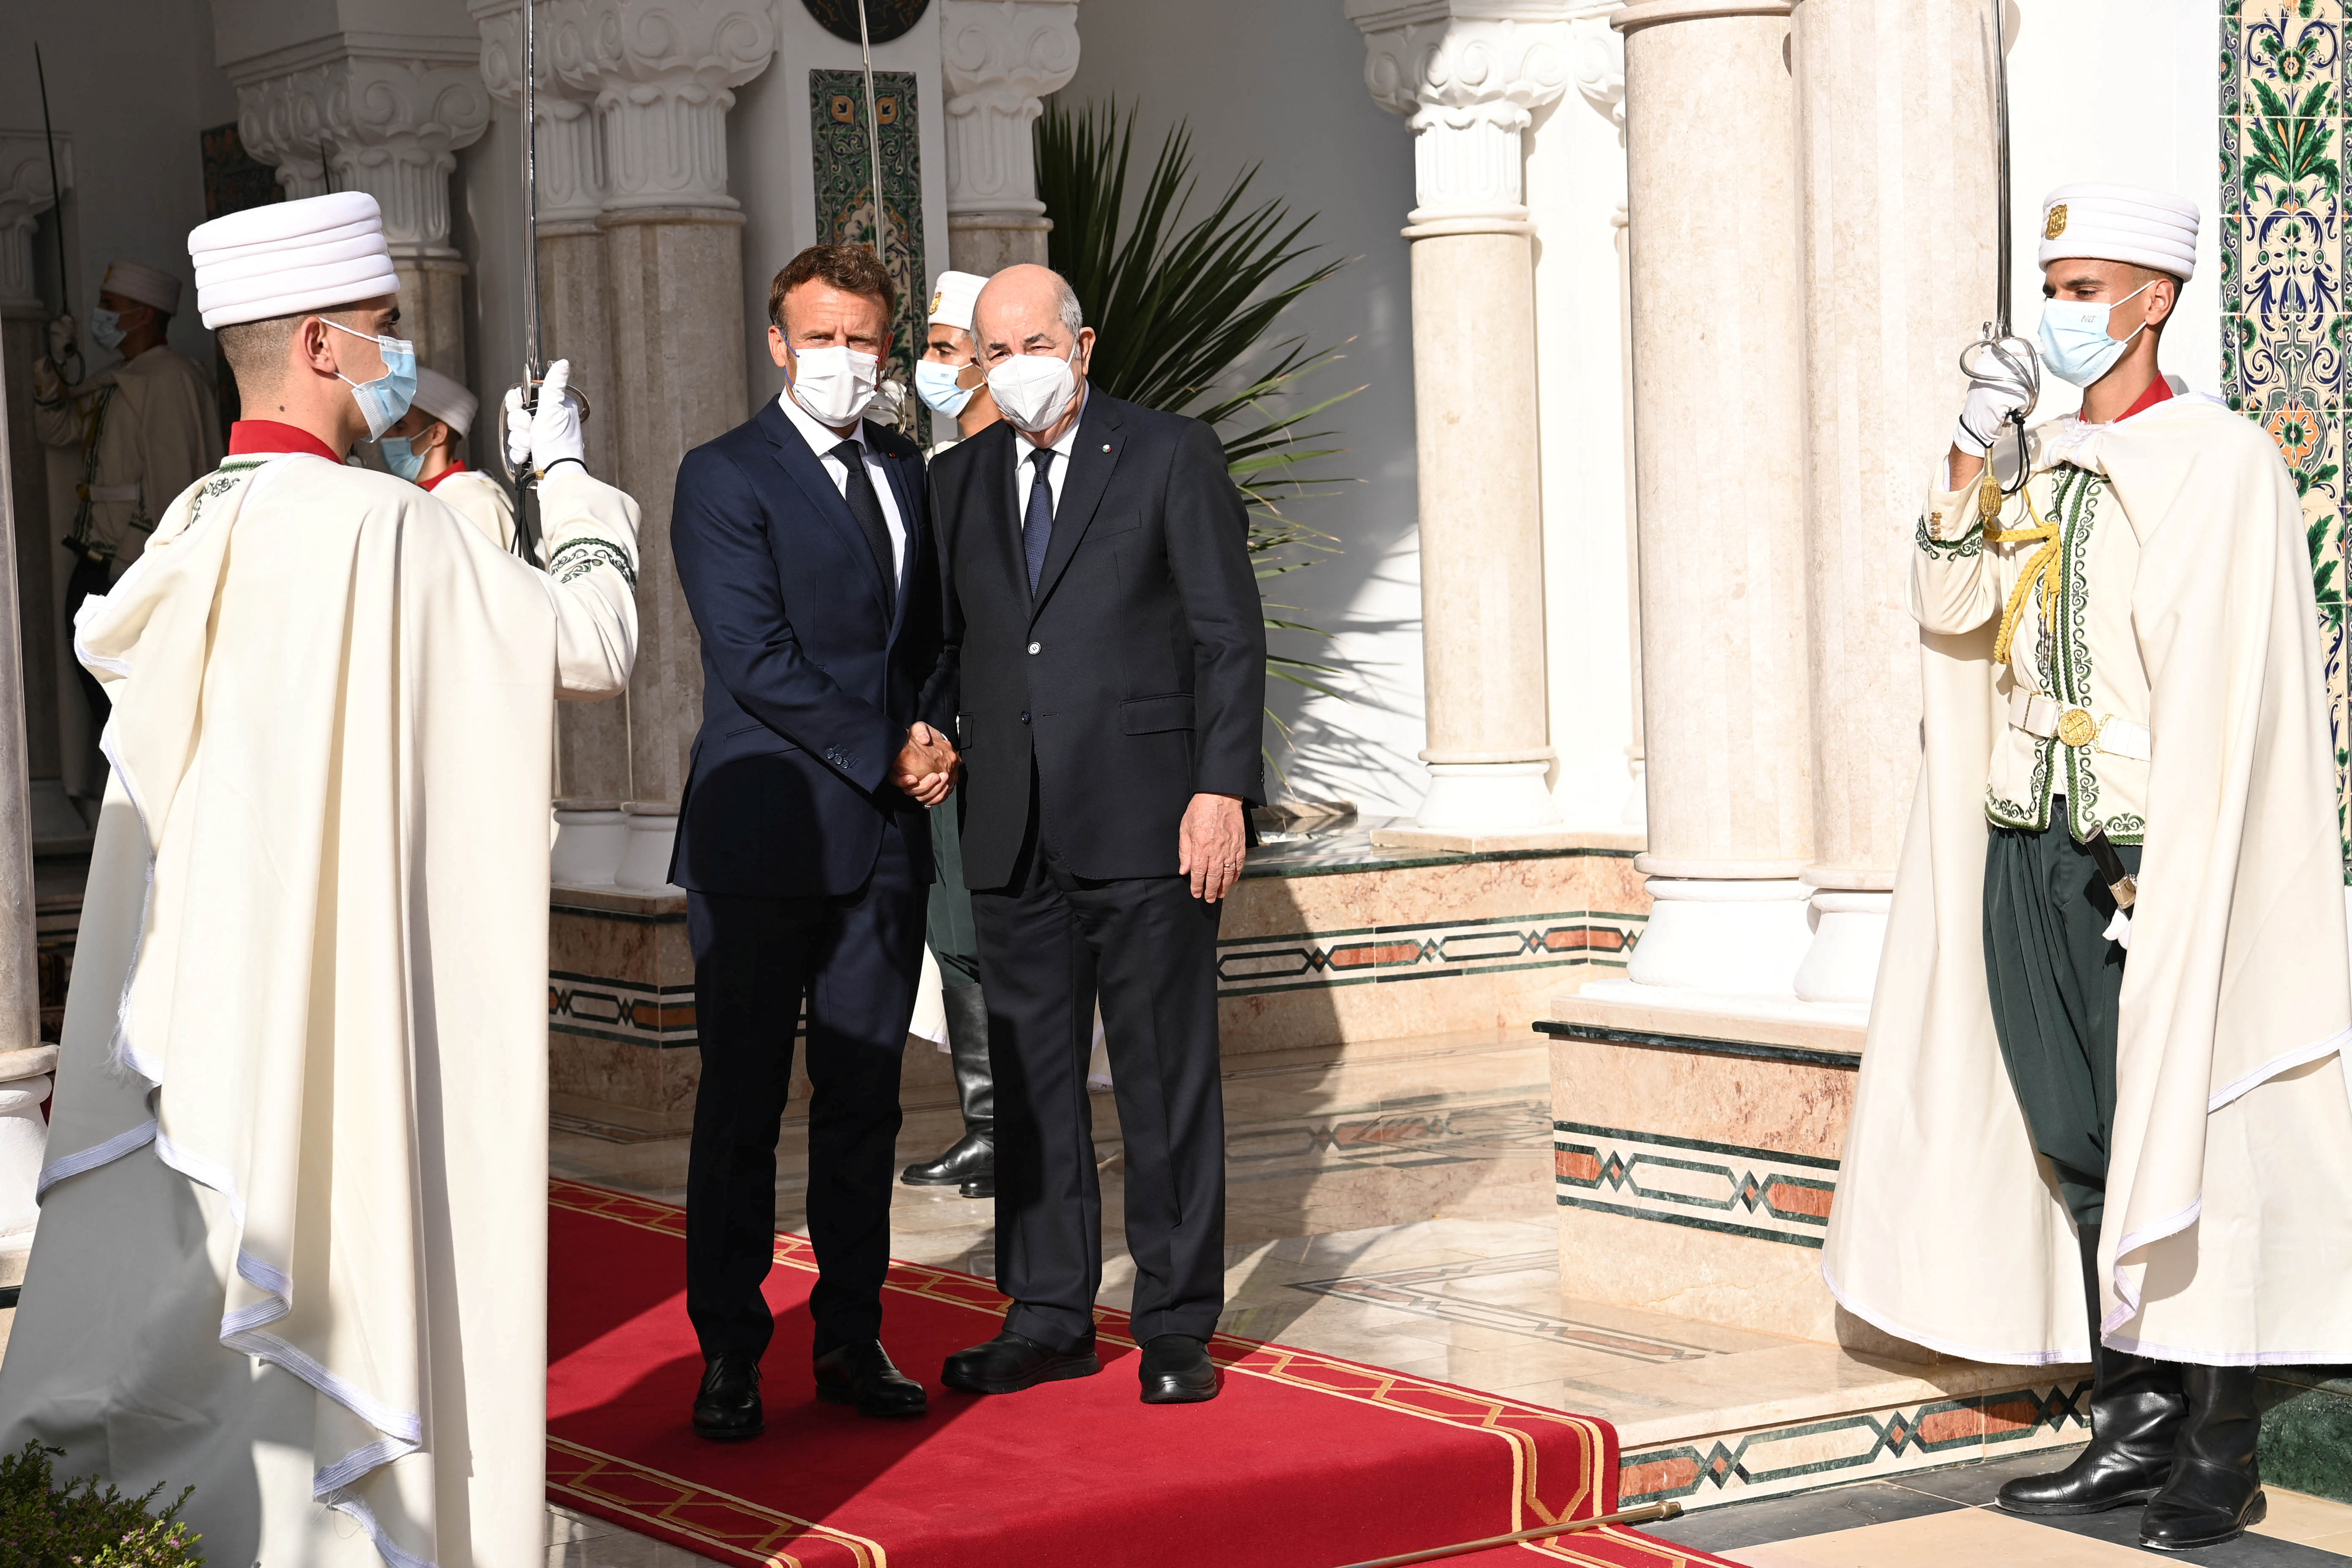 French President Emmanuel Macron shakes hand with Algerian President Abdelmadjid Tebboune at the presidential palace in Algiers